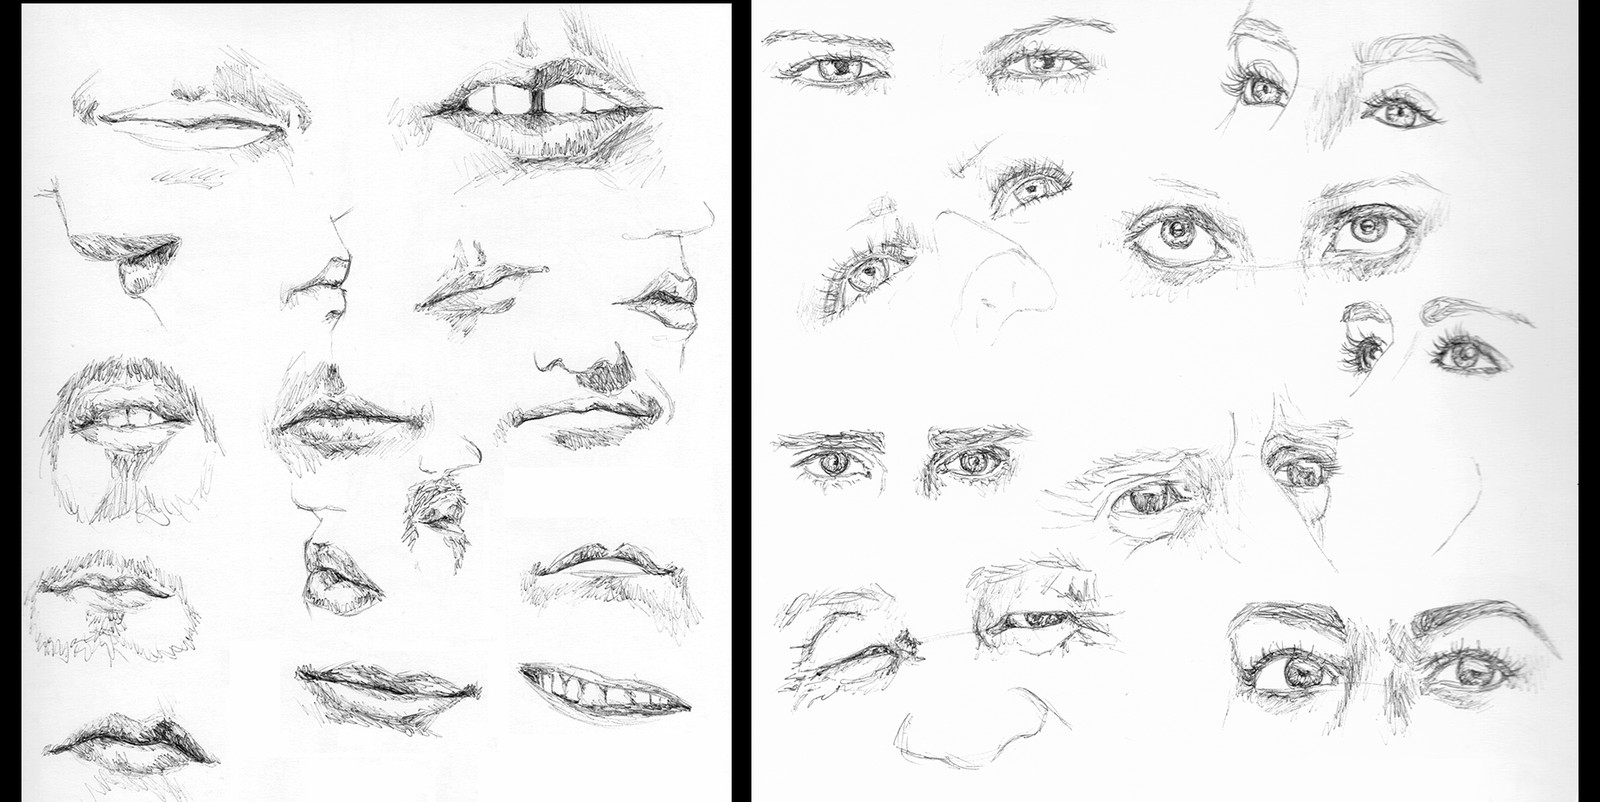 Anatomy practice - Mouths and Eyes